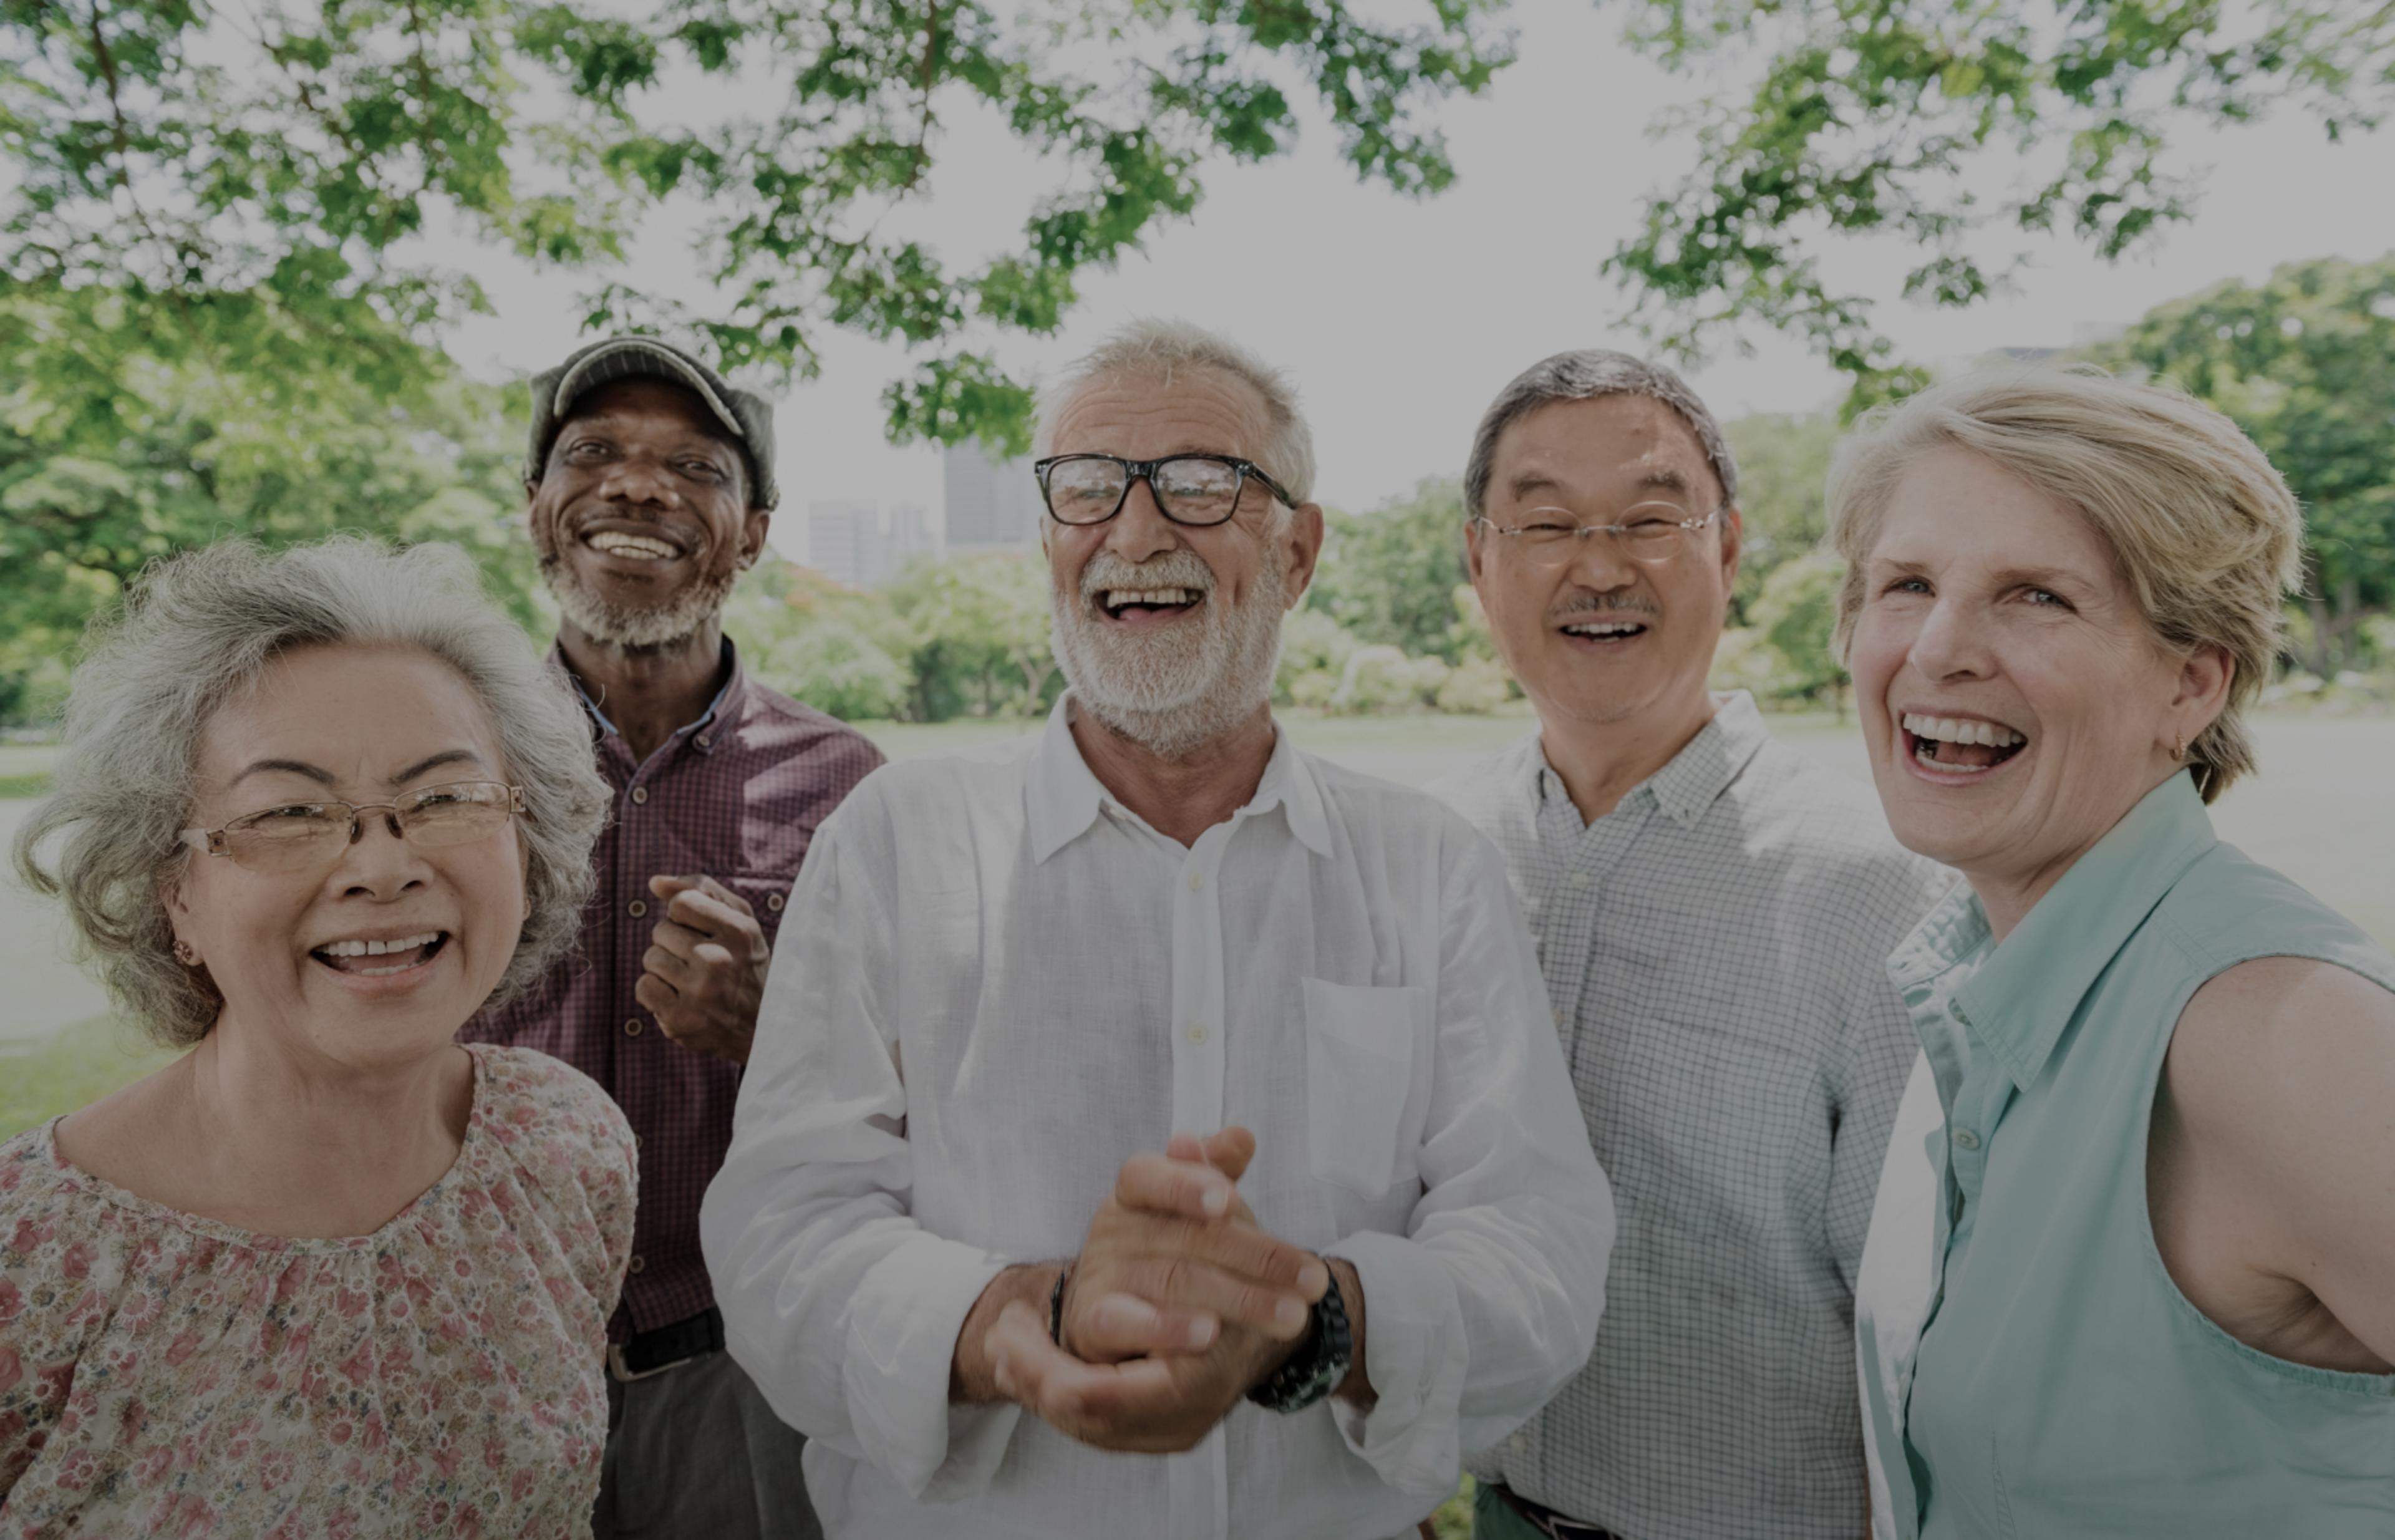 A group of elderly people standing together laughing and smiling for the camera with a field in the background and a tree over head.